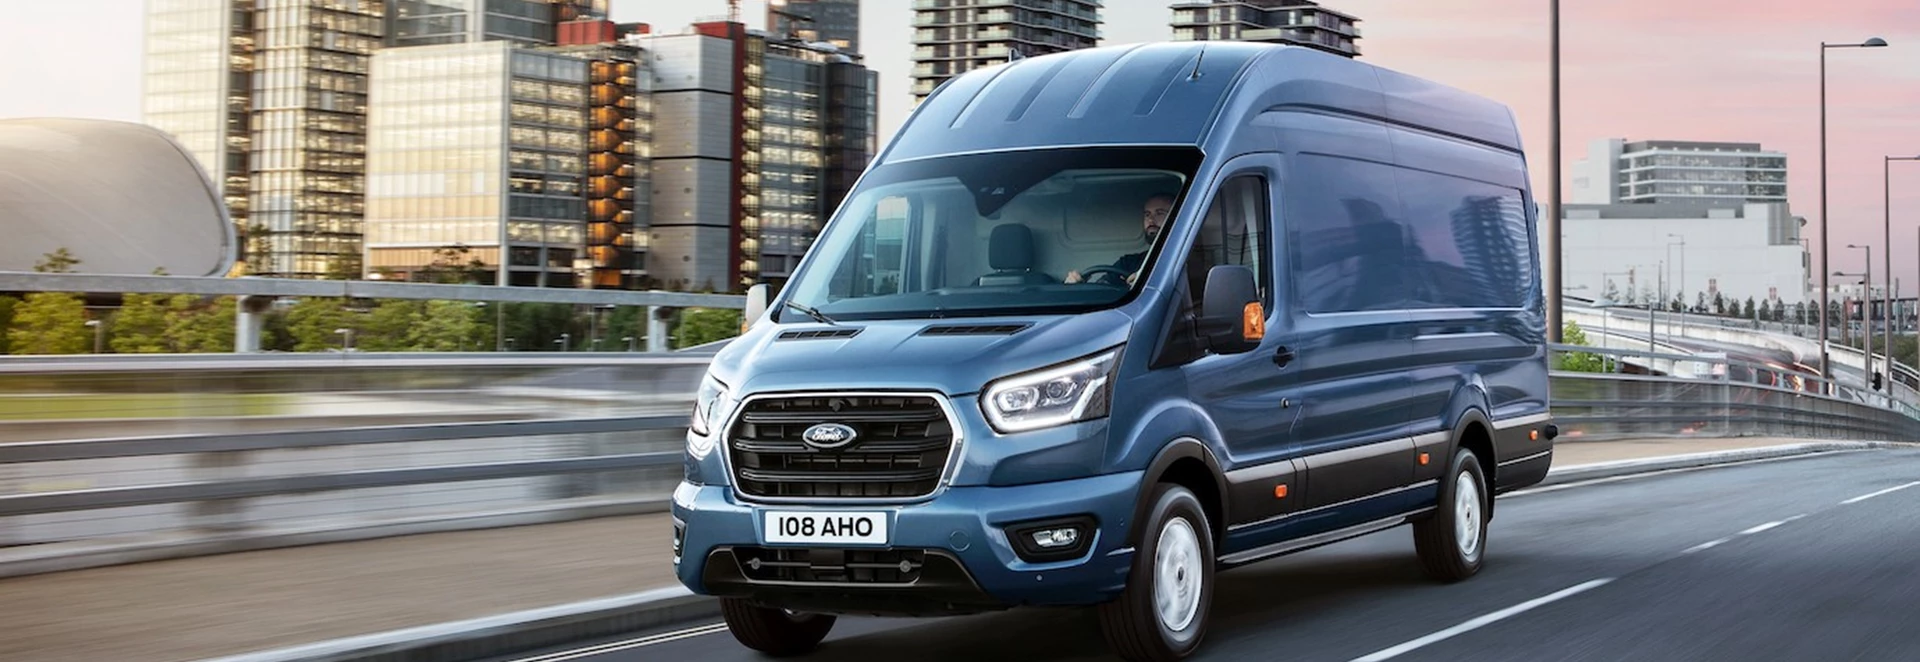 Upgraded Ford Transit van revealed with new safety and connected services 